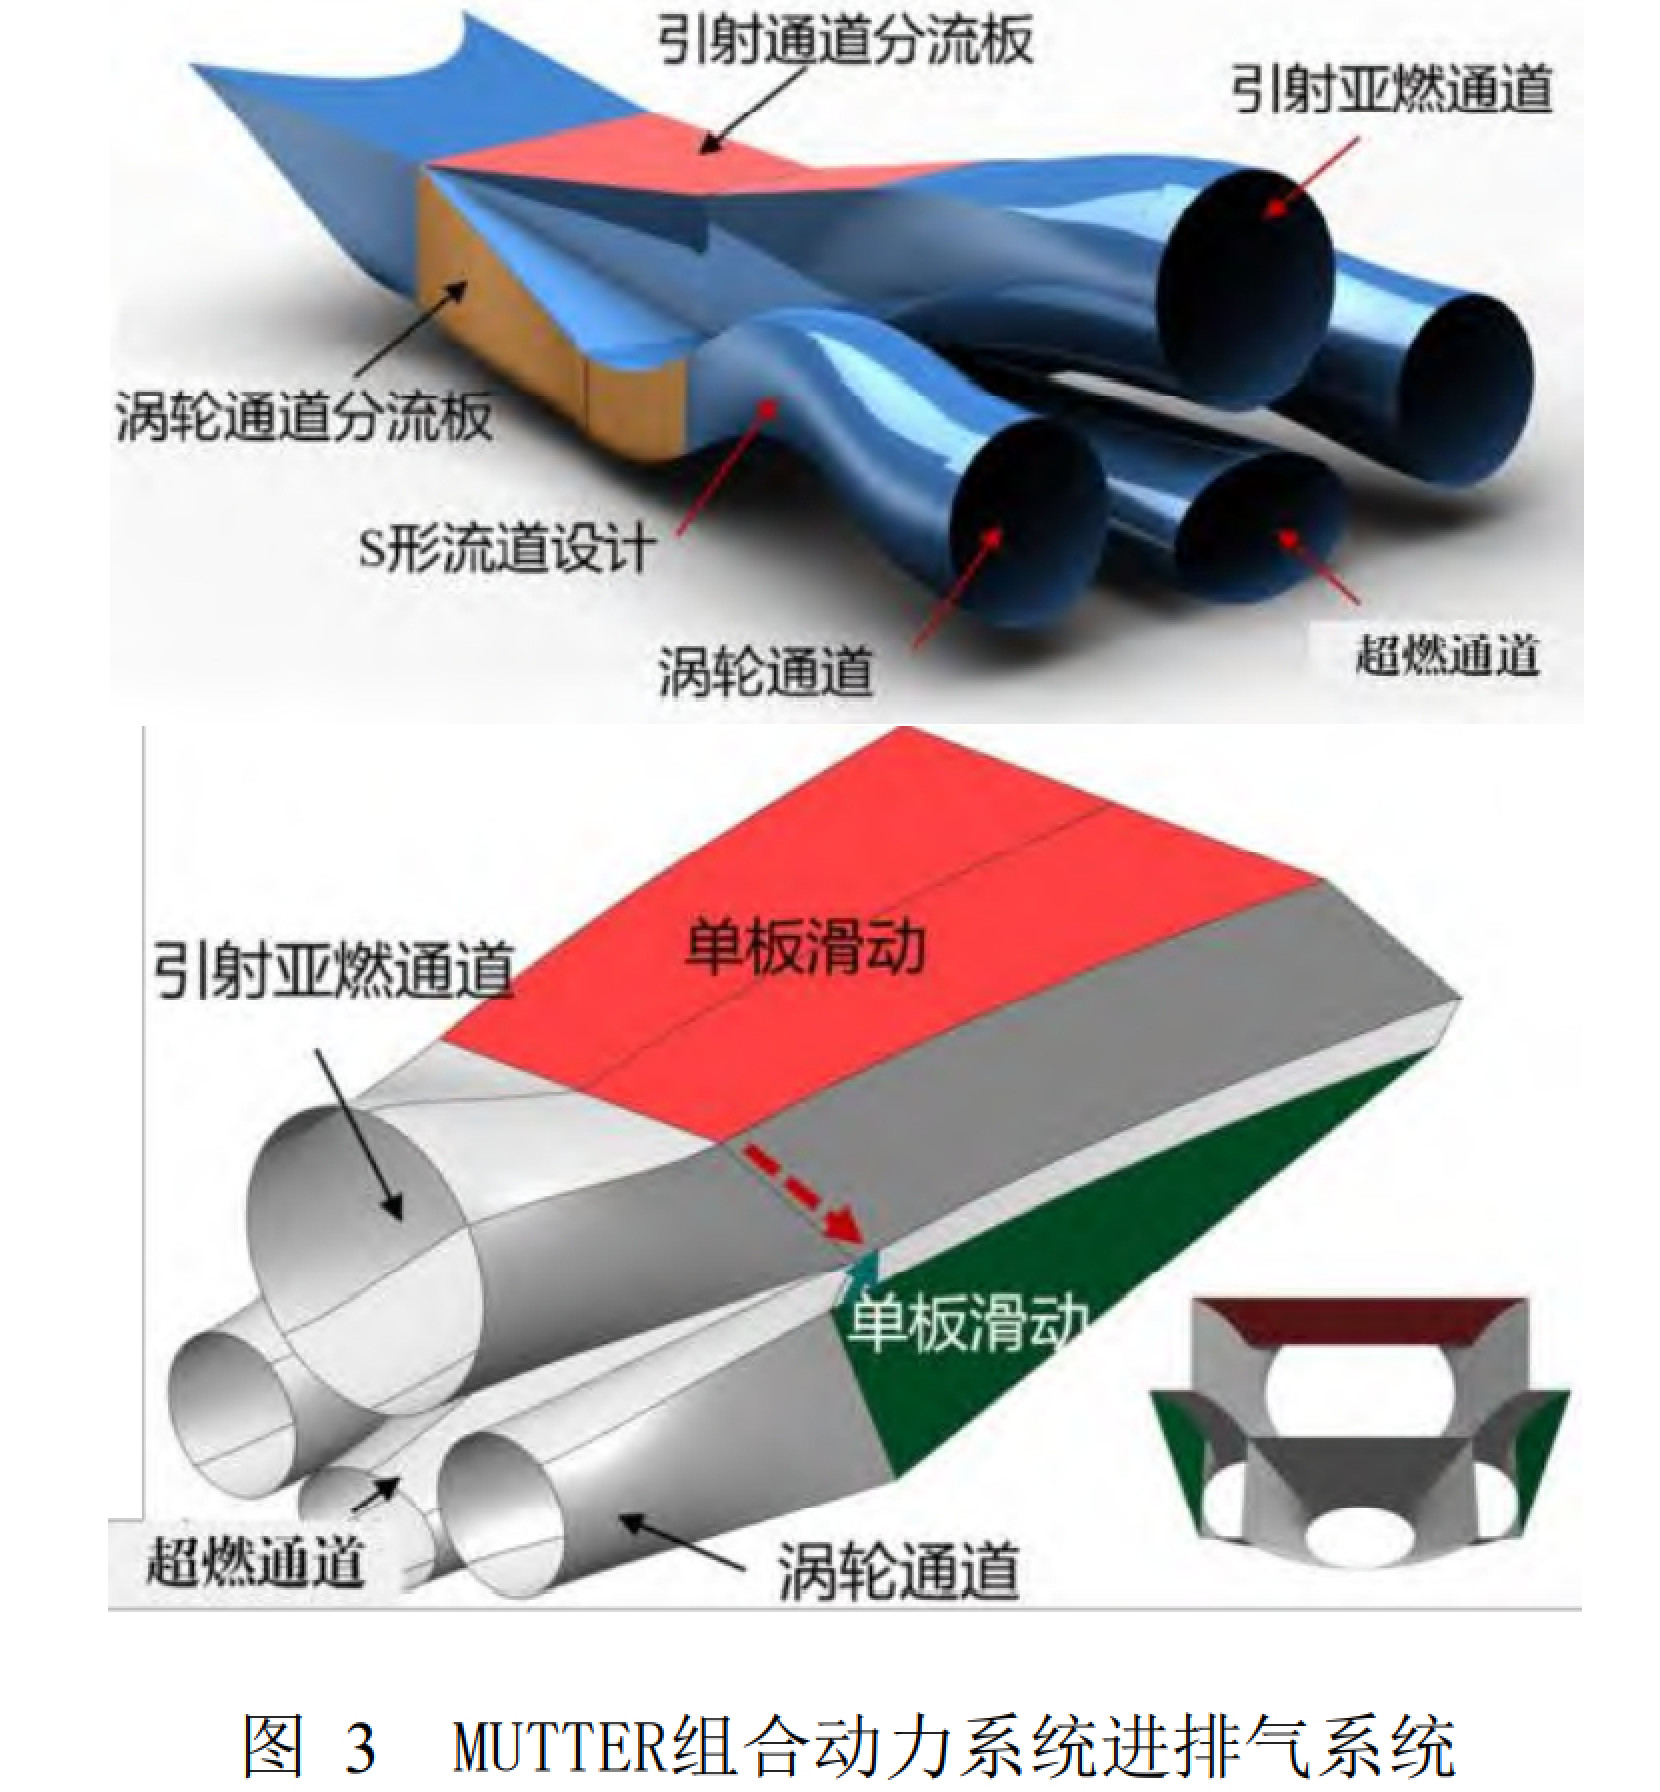 Air inlet and exhaust of the MUTTER hypersonic engine design that uses three different types of power systems. Image: Yin Zeyong